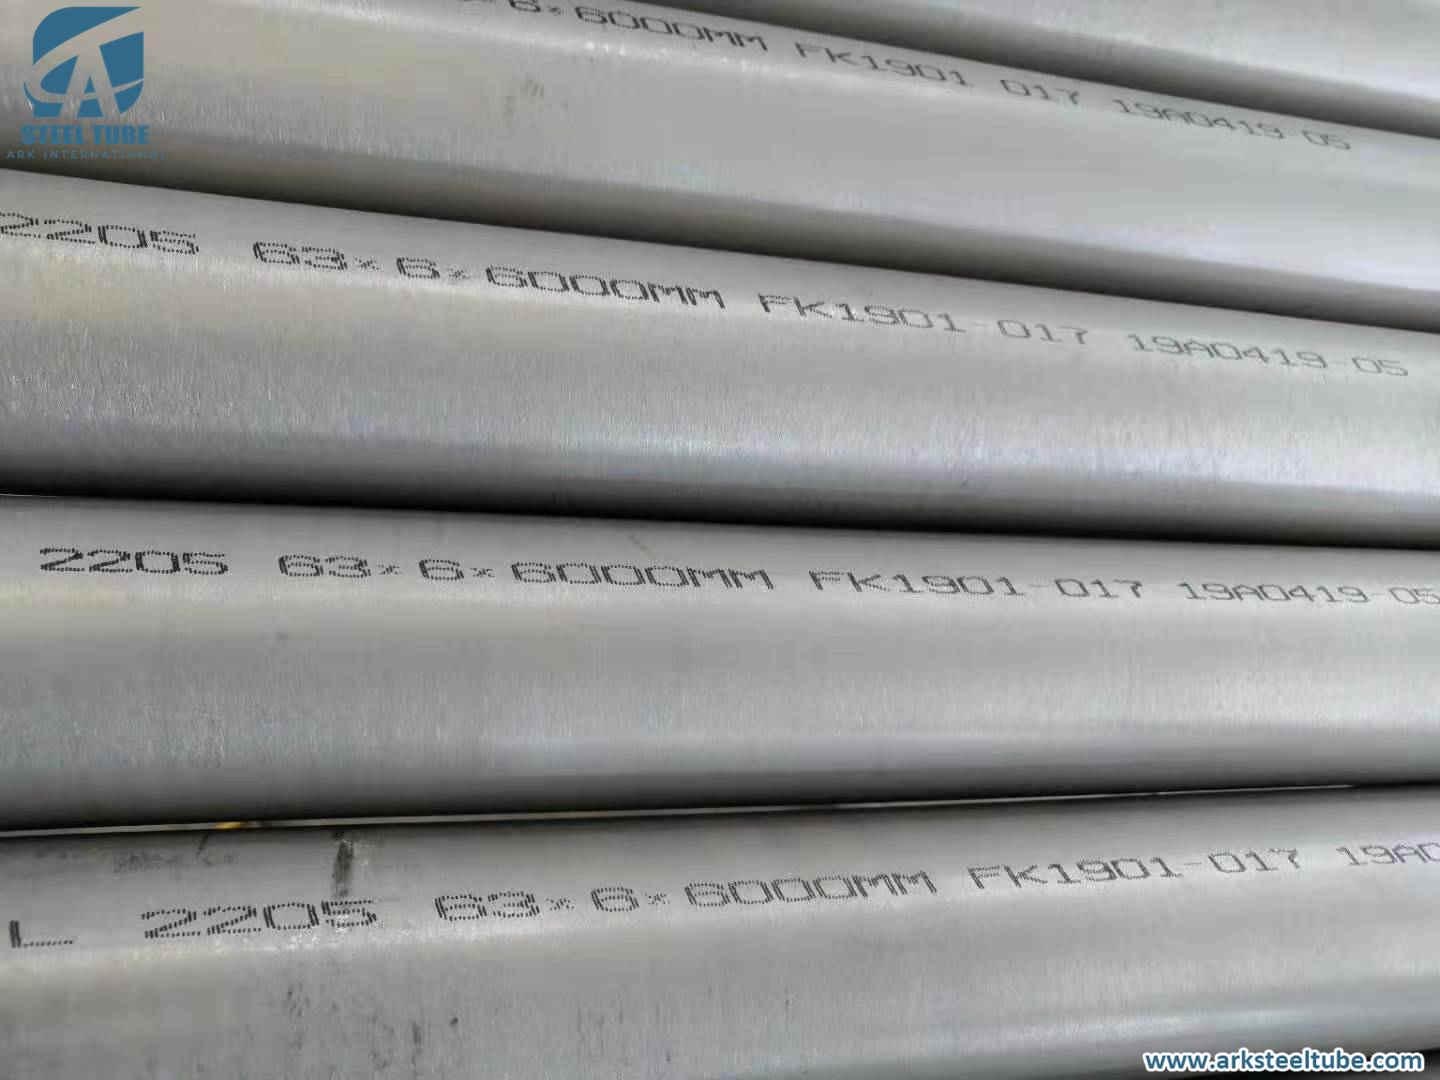 S31803 S32304 S31500 S32550 S32750 S32760 Duplex Stainless Steel Tube Pipe 5